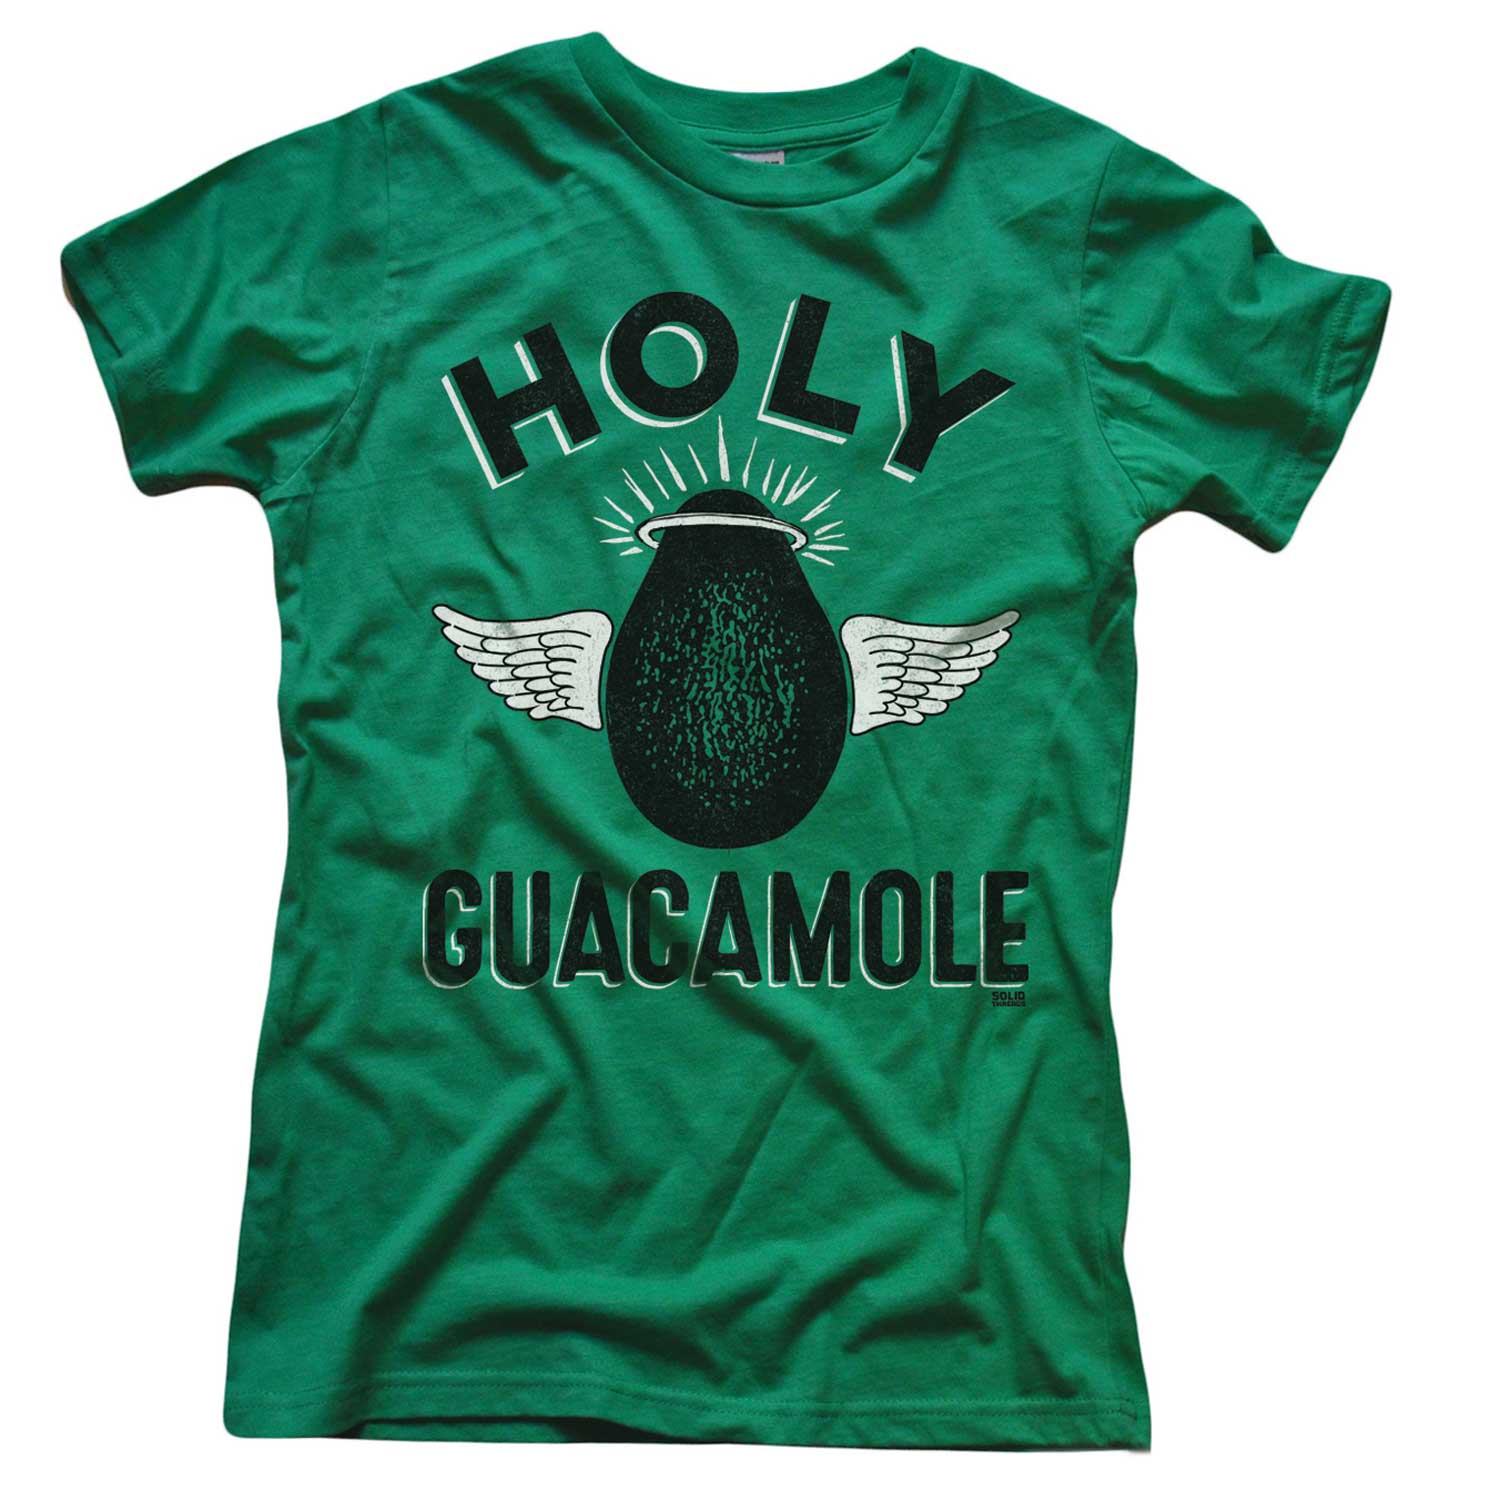 Women's Holy Guacamole Vintage Graphic Crop Top | Funny Avocado T-shirt | Solid Threads